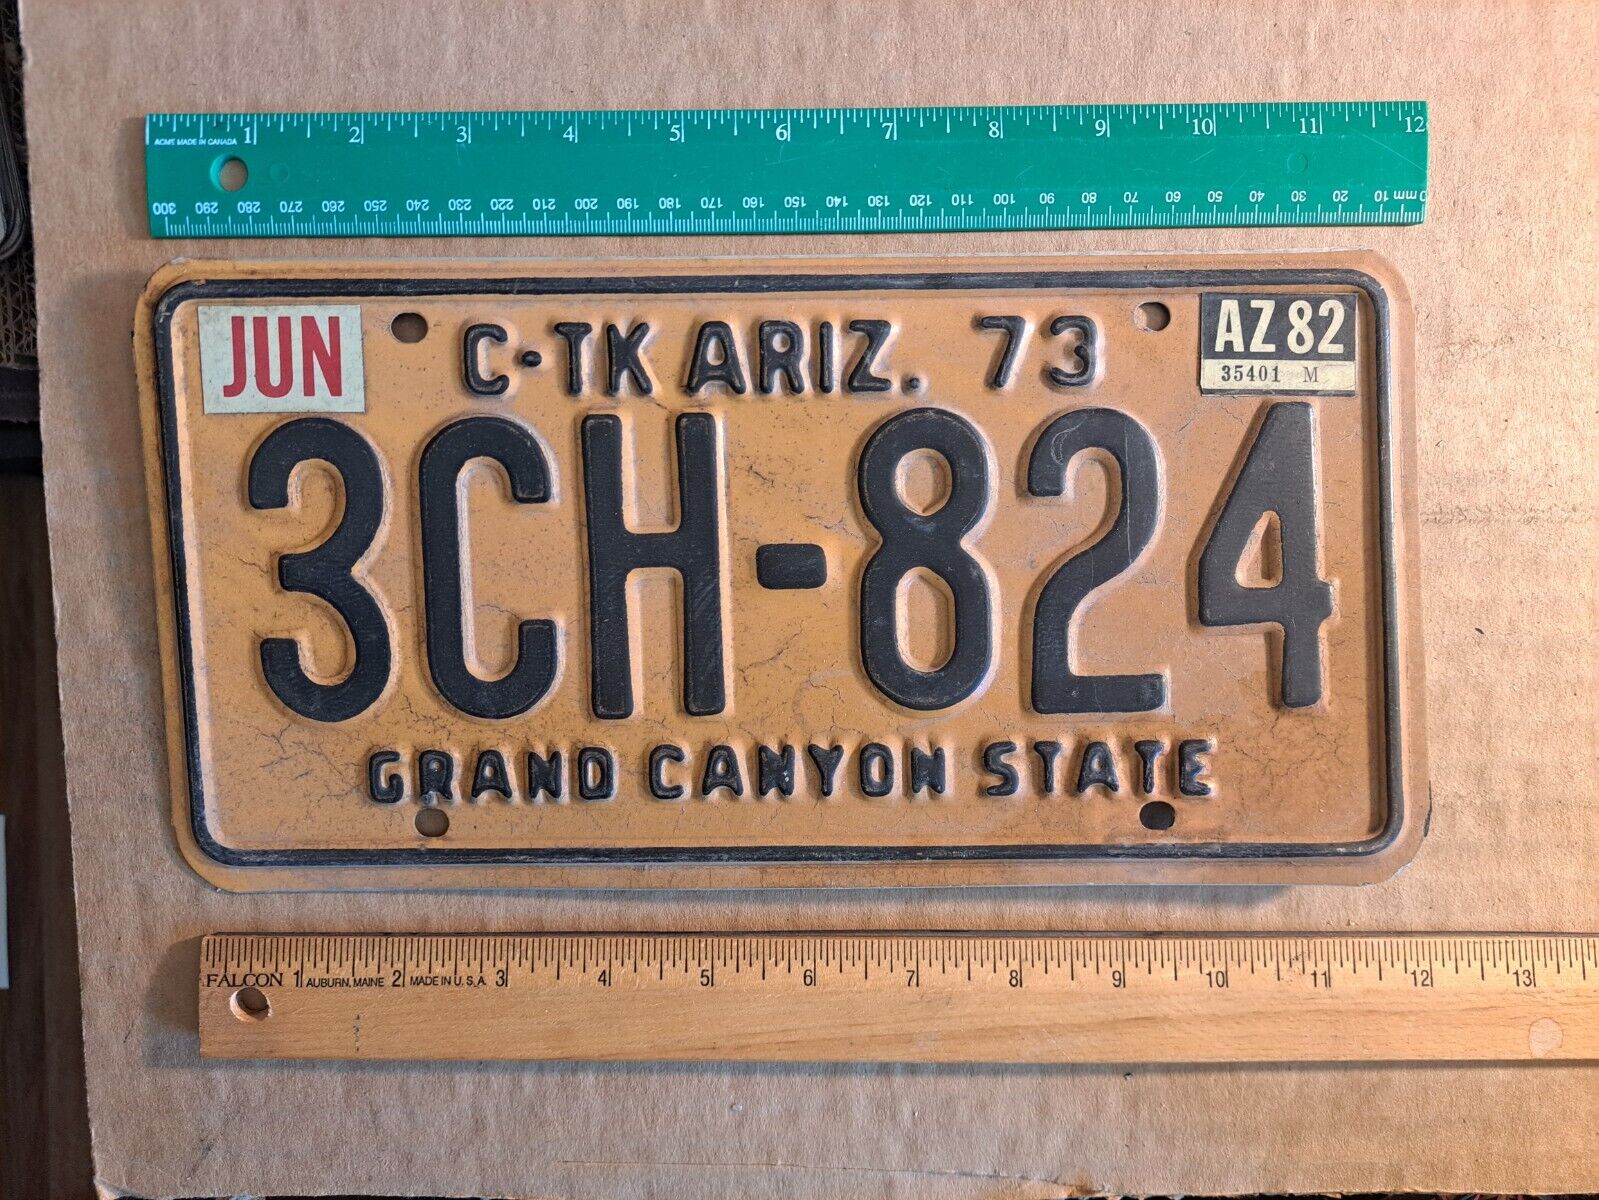 License Plate, Arizona, 1973, C-2 TK, Truck, Commercial, 3 CH - 824